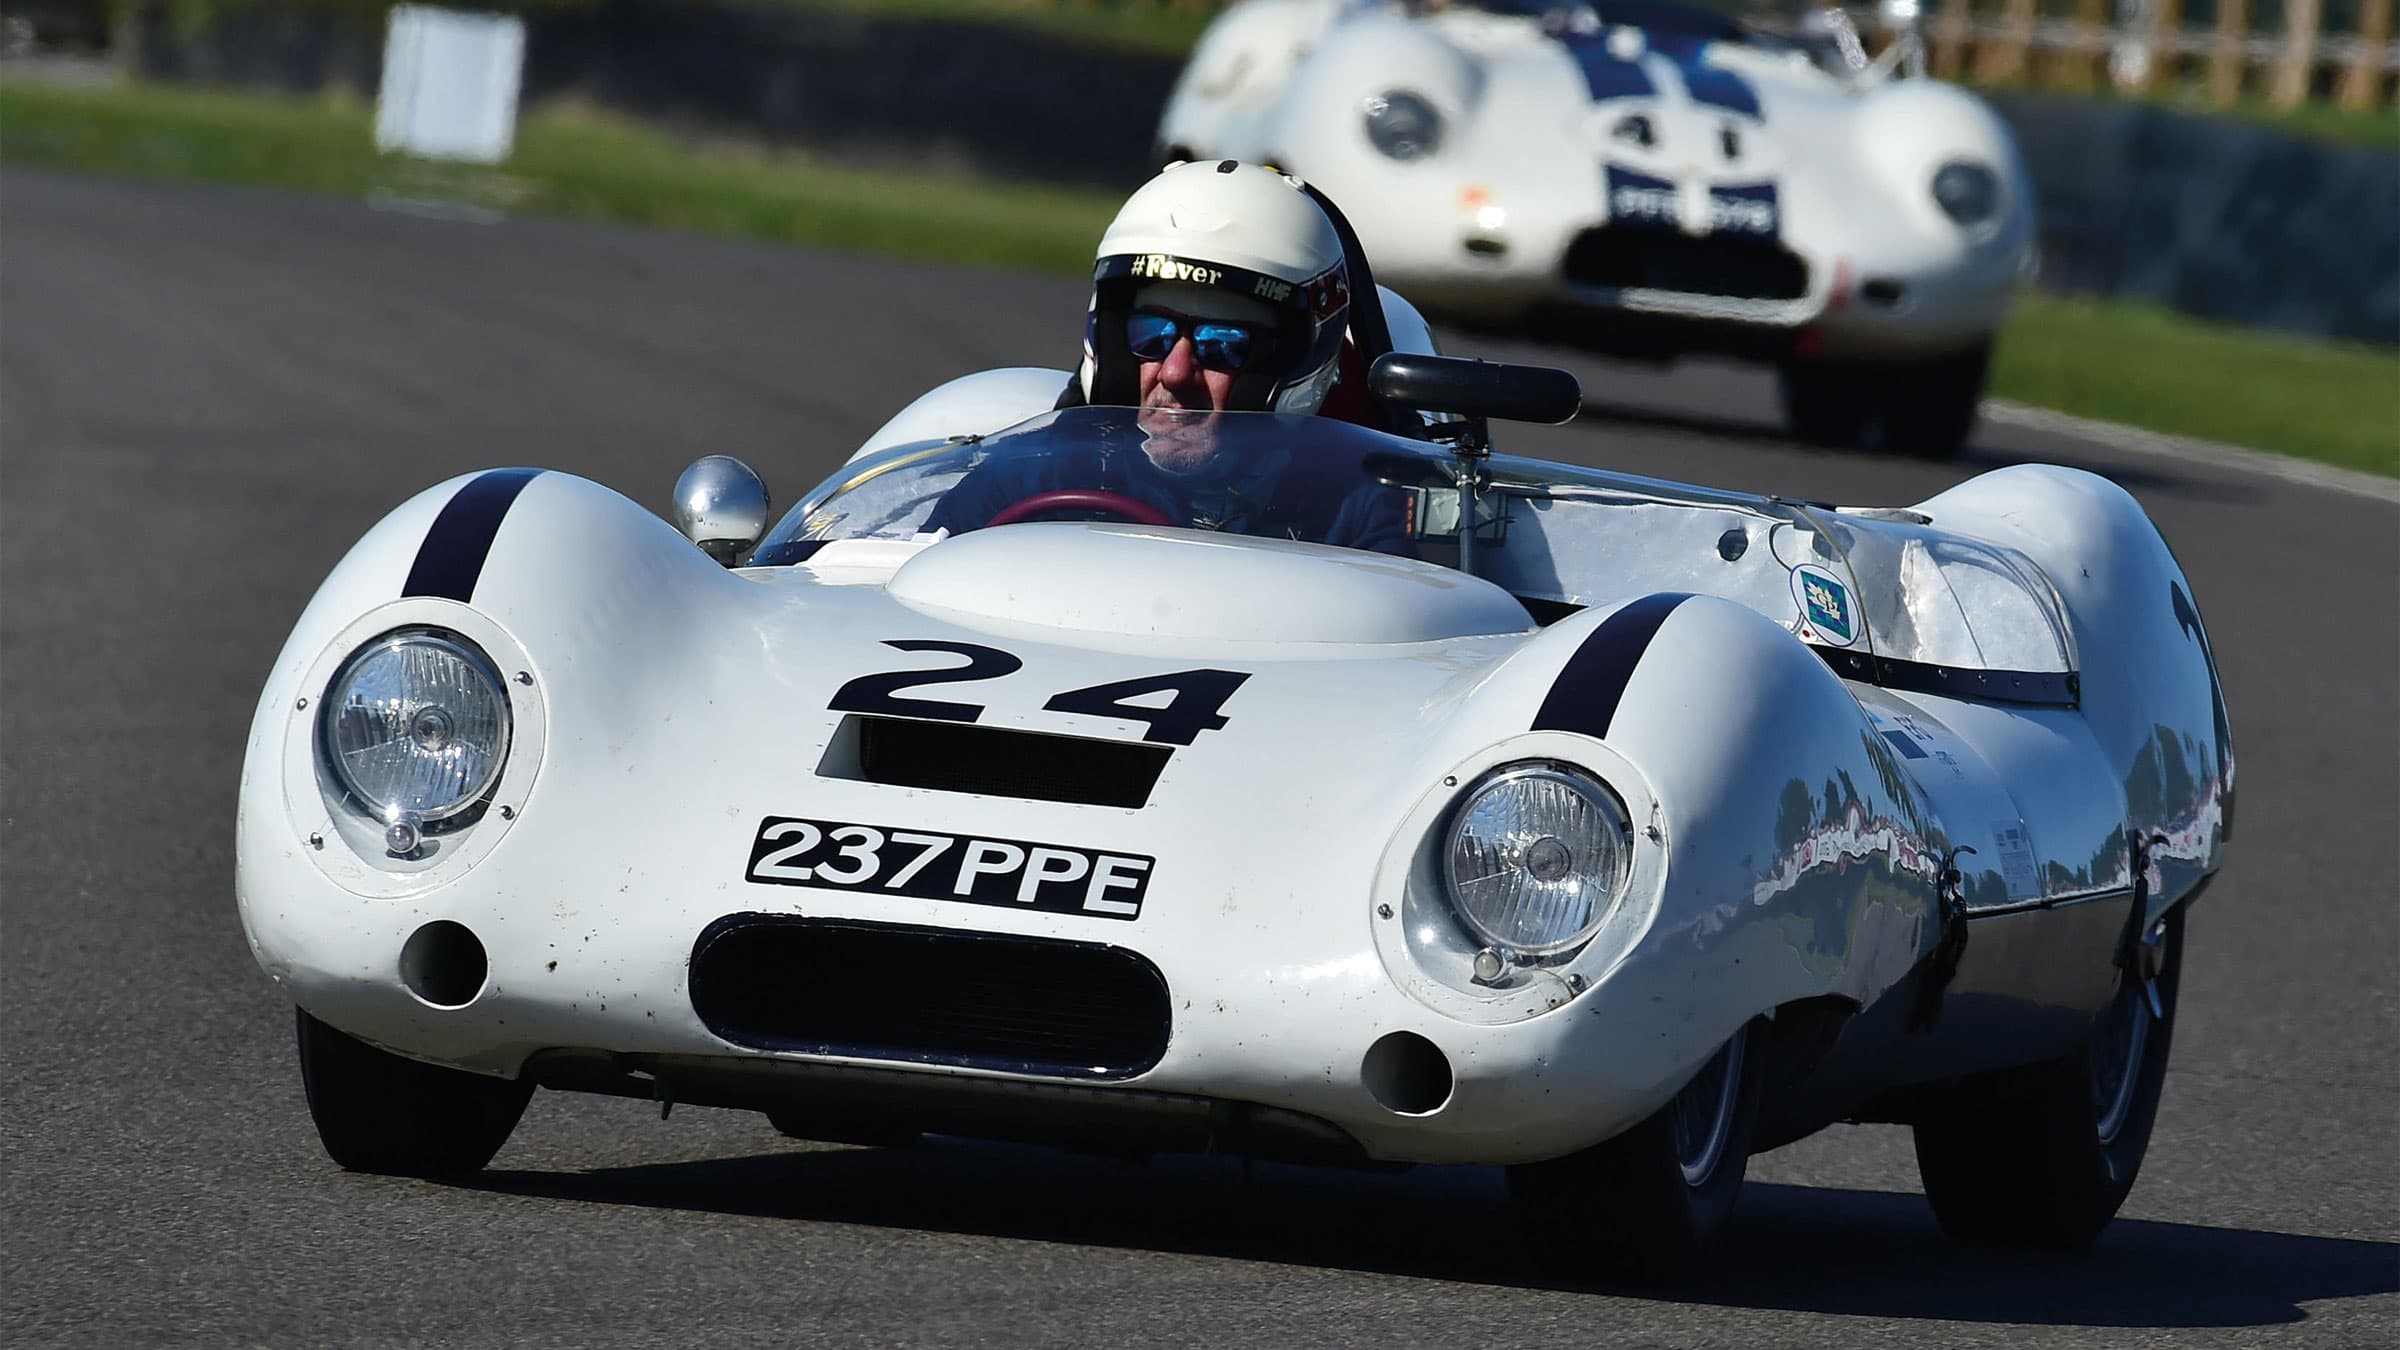 Roger wills on track at goodwood